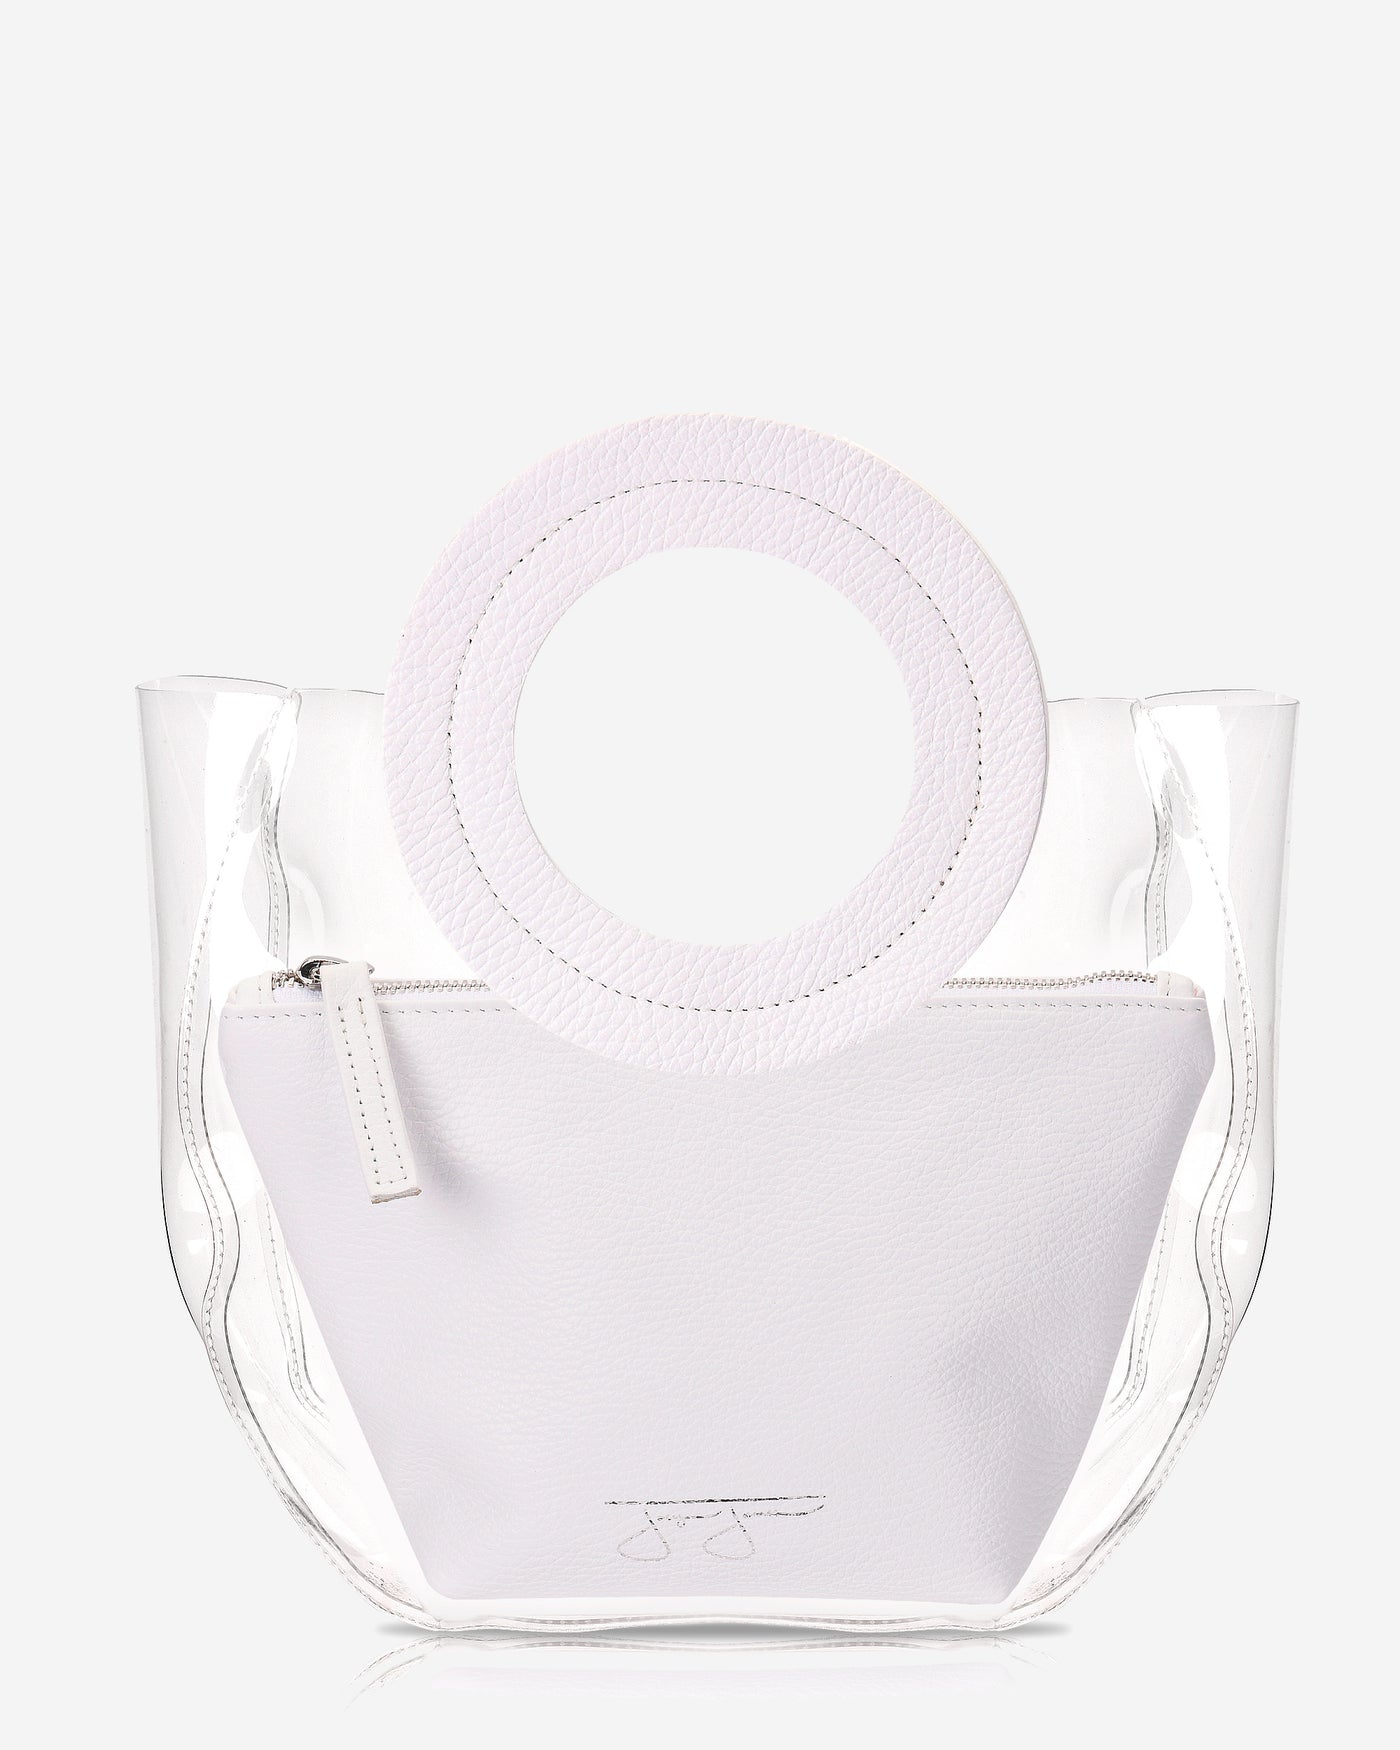 Lacey Bag - White Lacey Clear Bag Joey James, The Label   